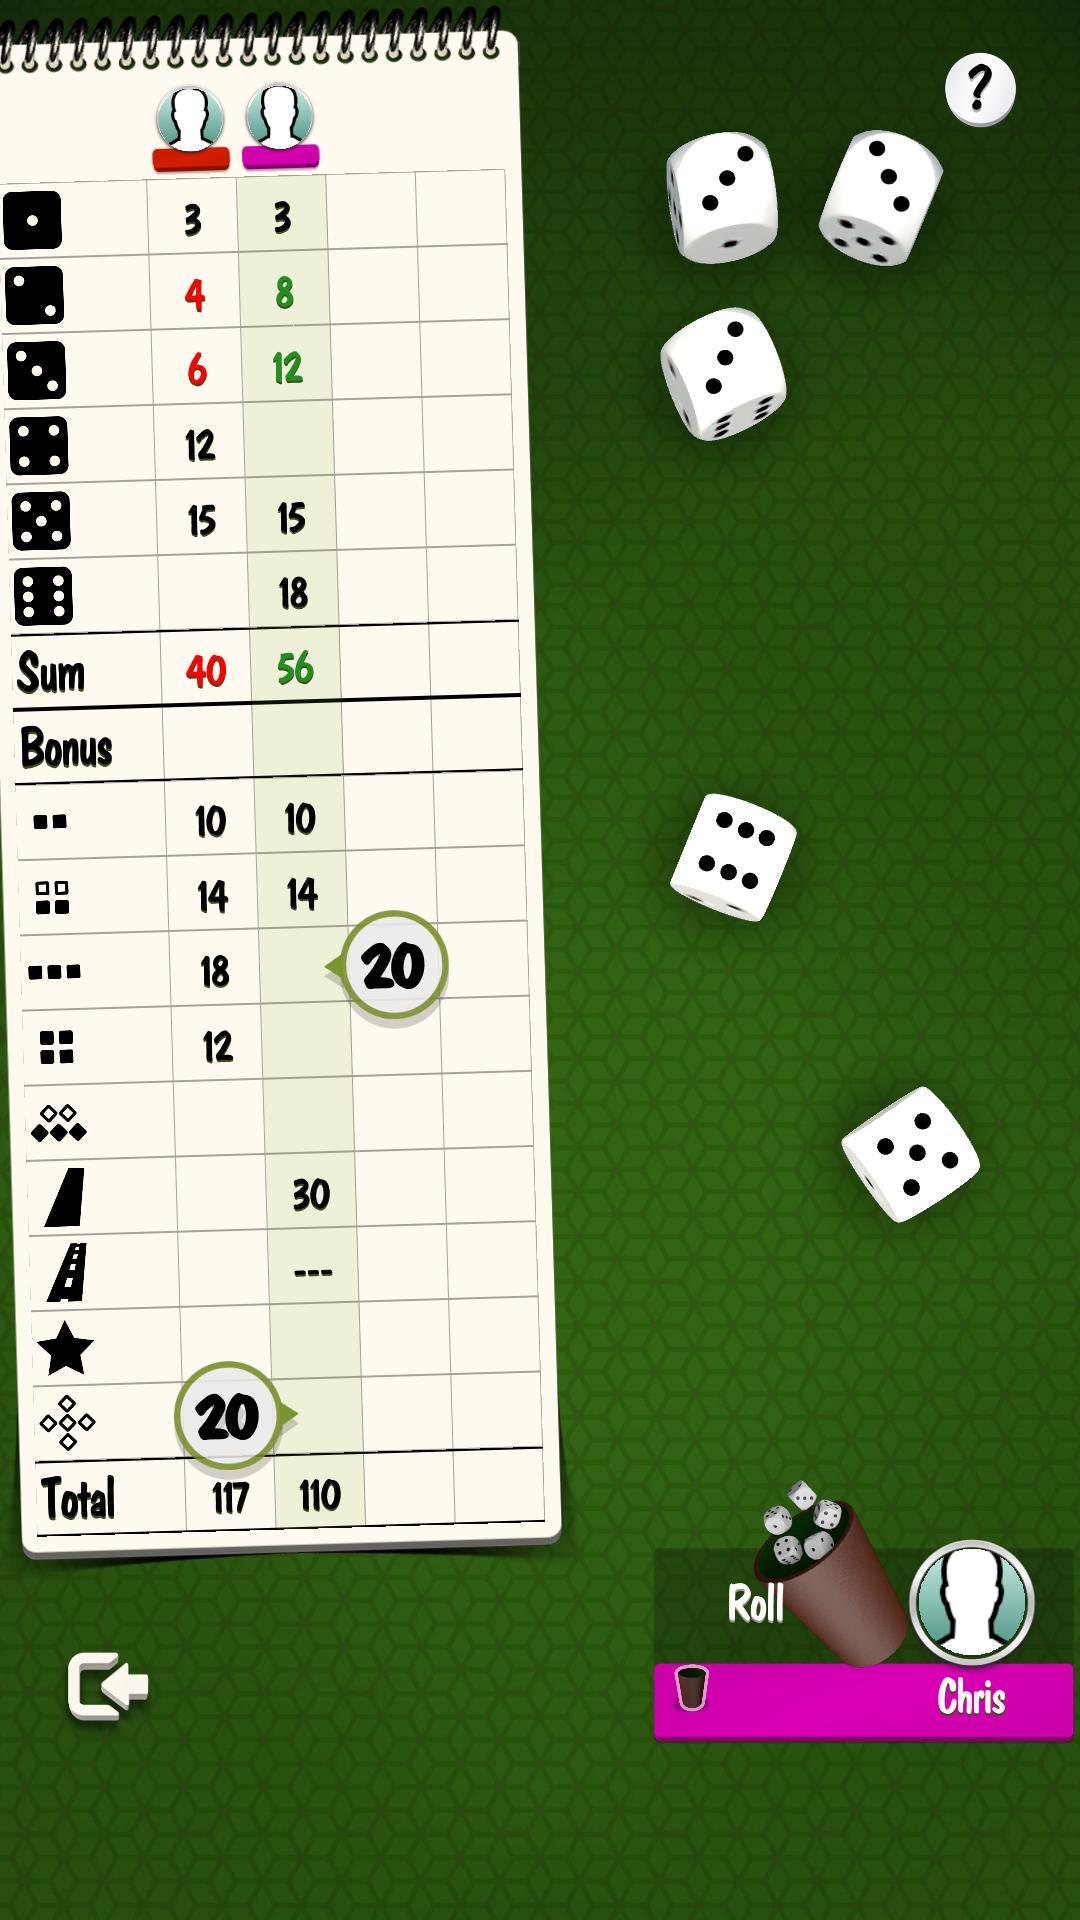 Yatzy Offline and Online - free dice game 3.3.4 Screenshot 5